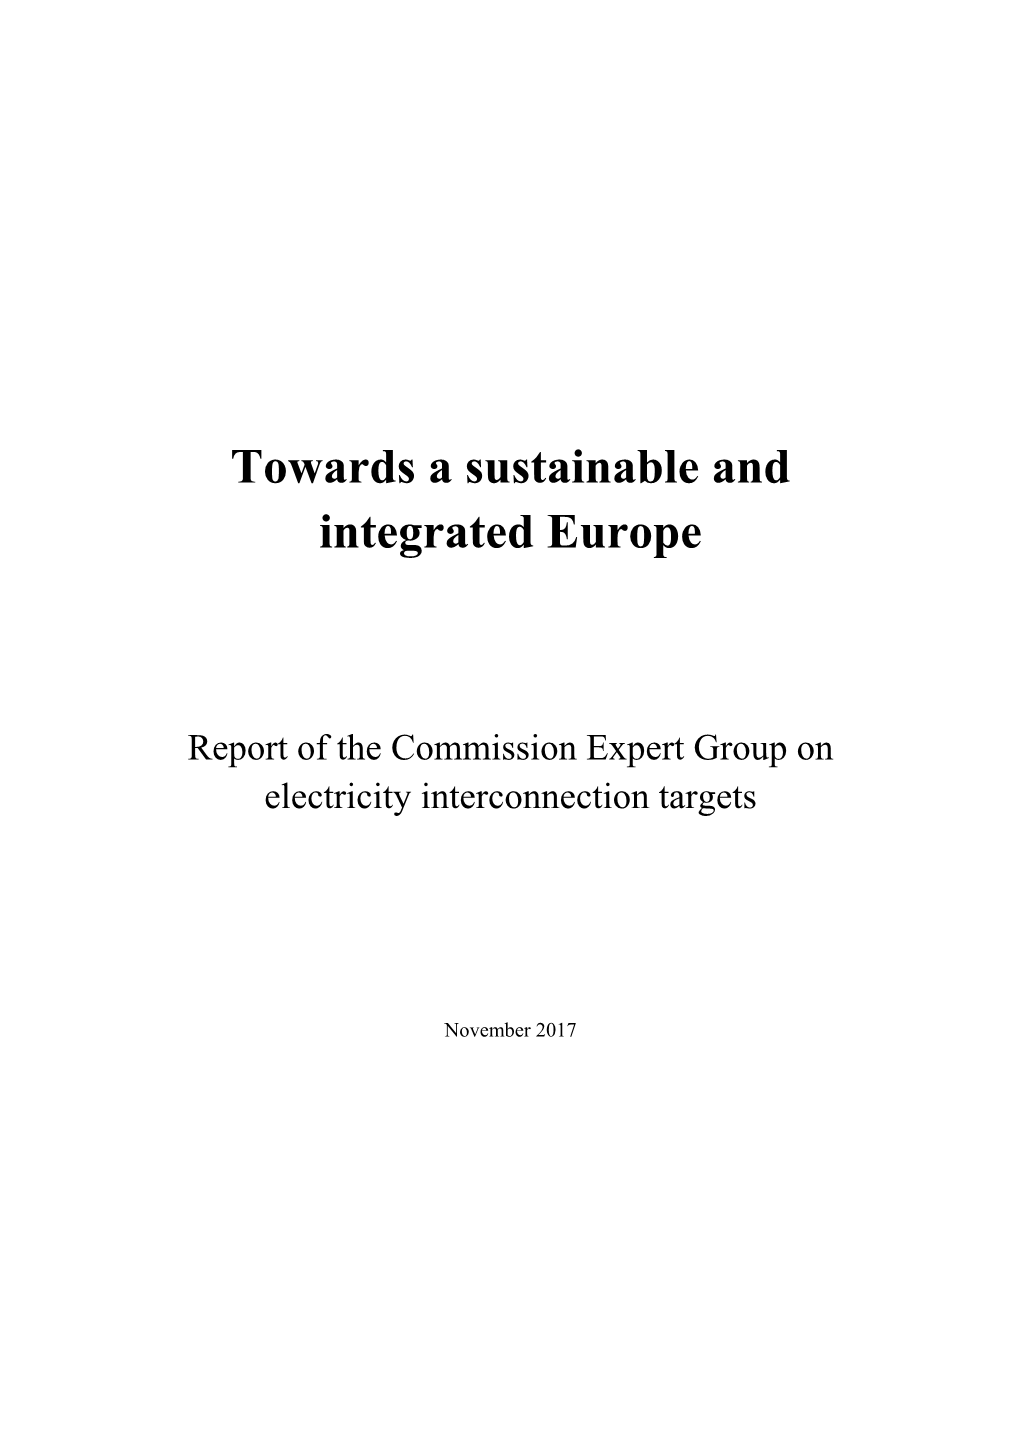 Towards a Sustainable and Integrated Europe